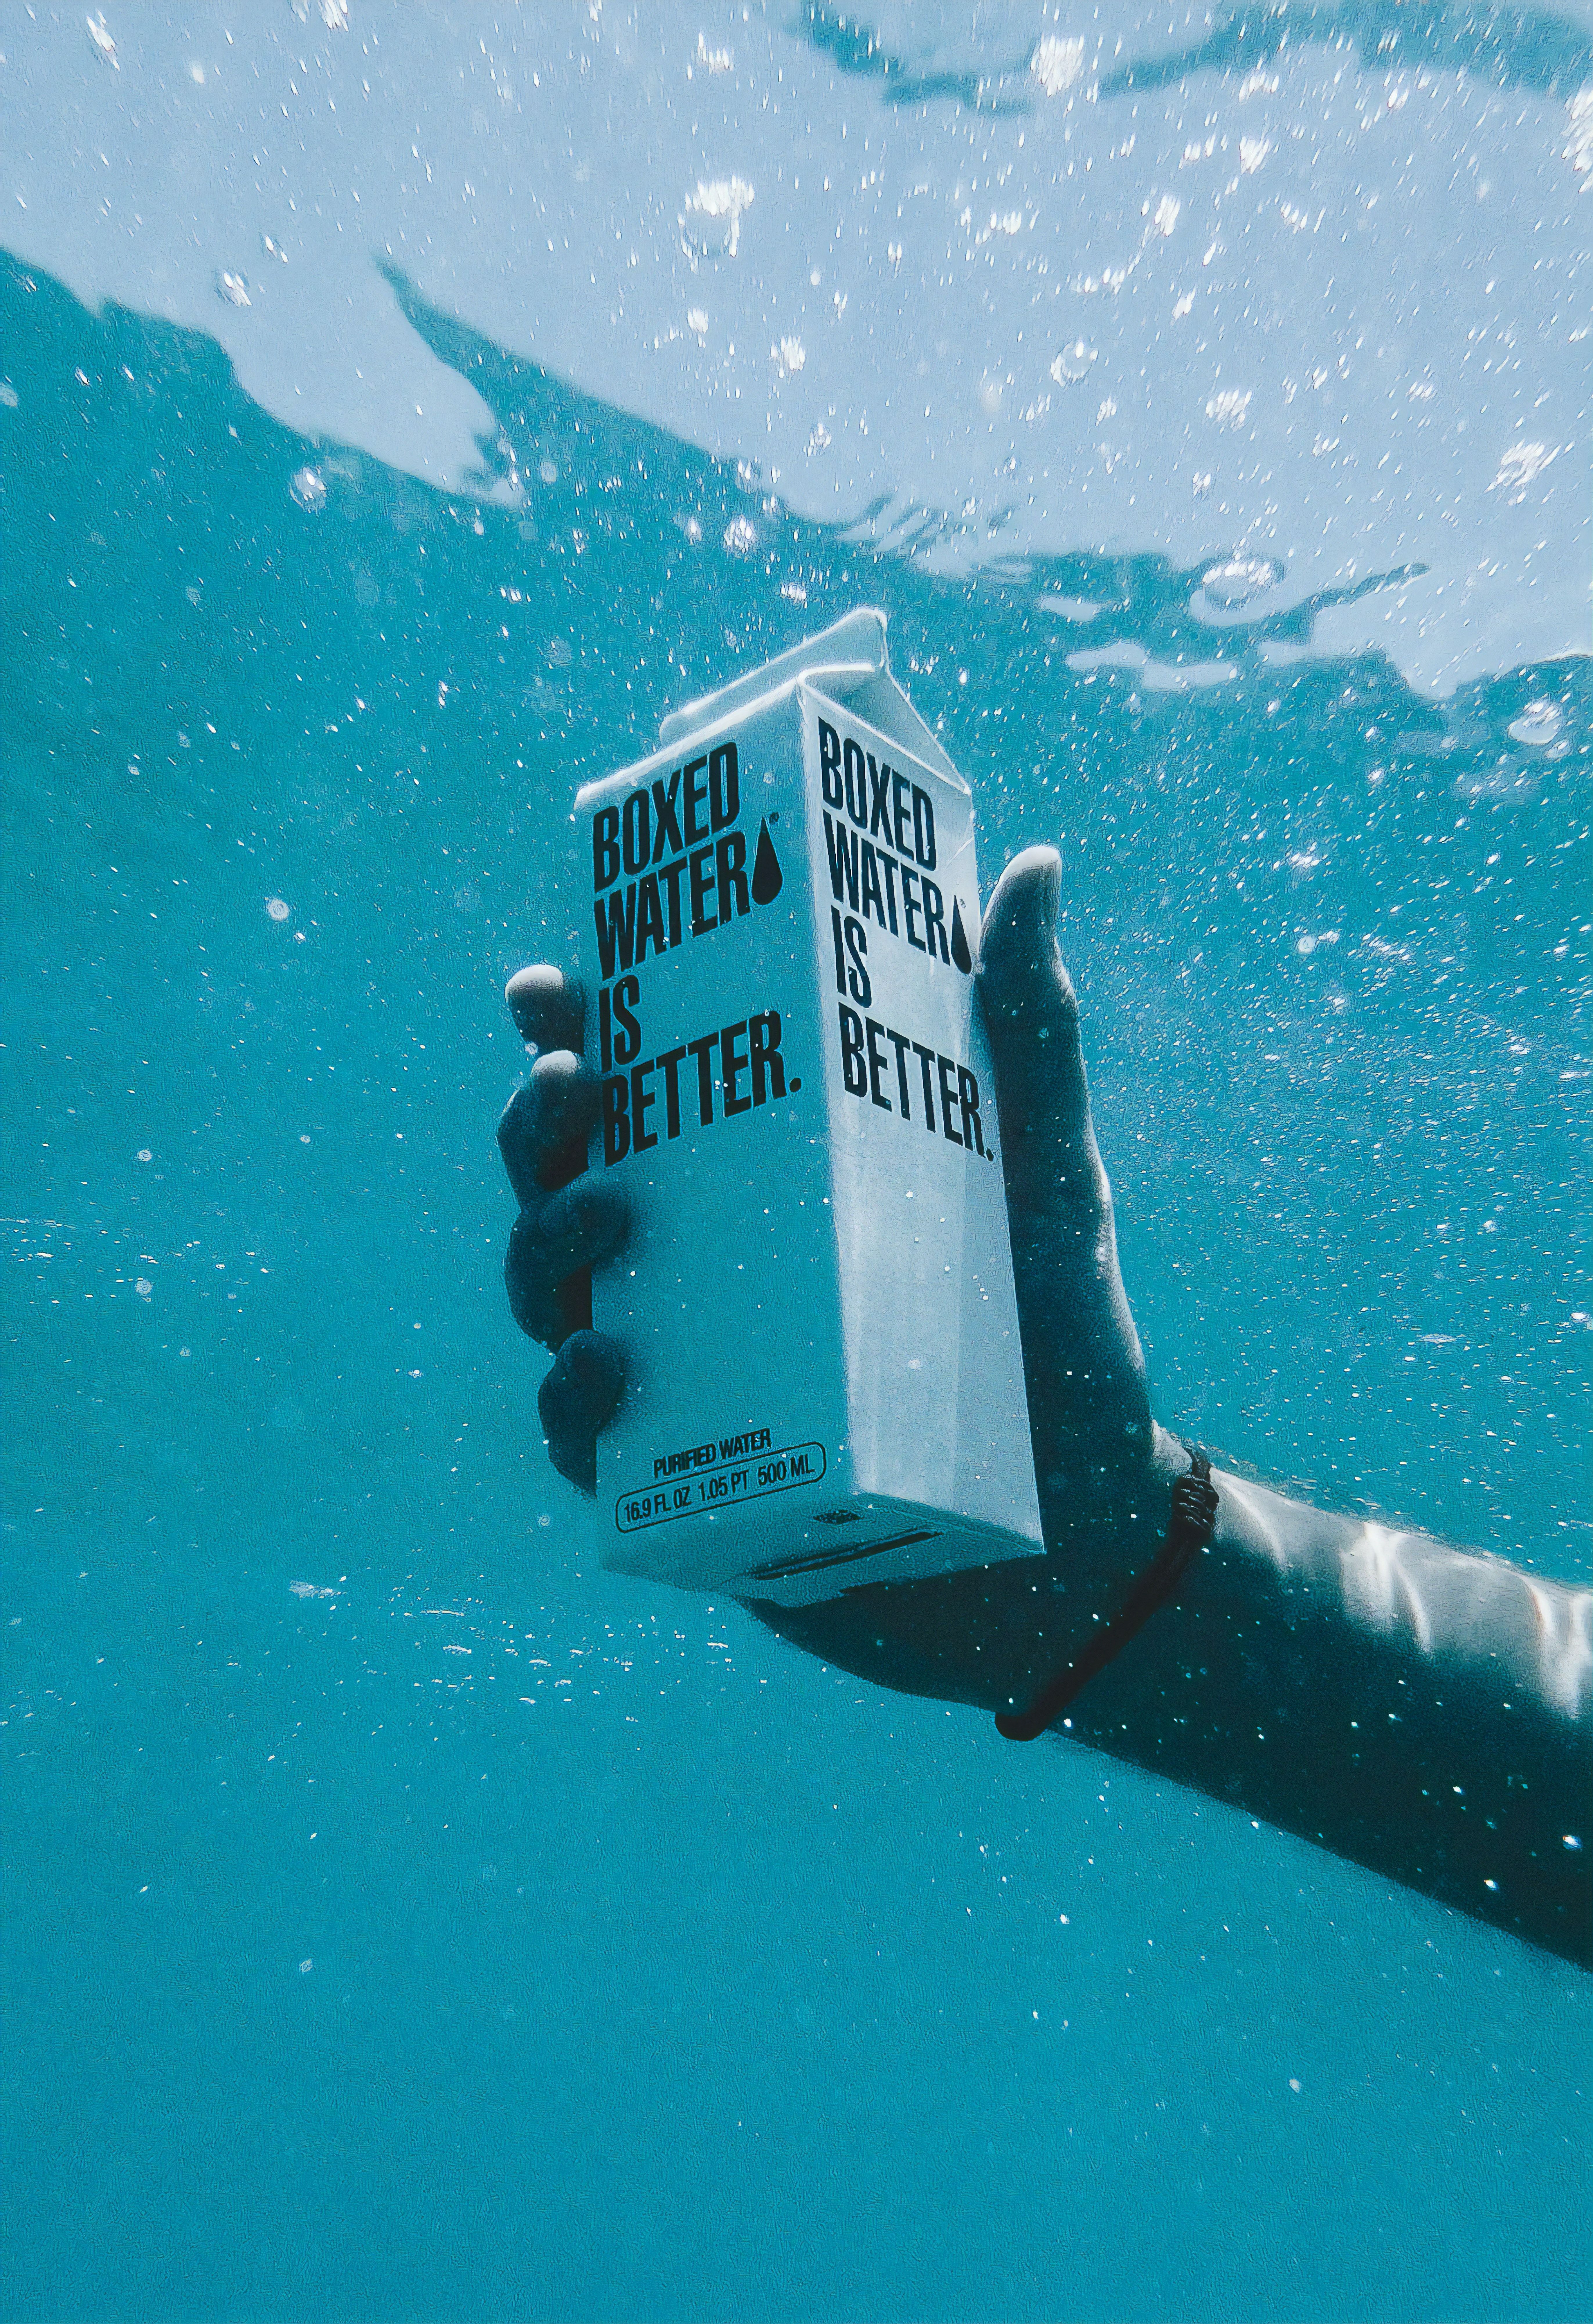 boxed water is better - Wallpaper Cave